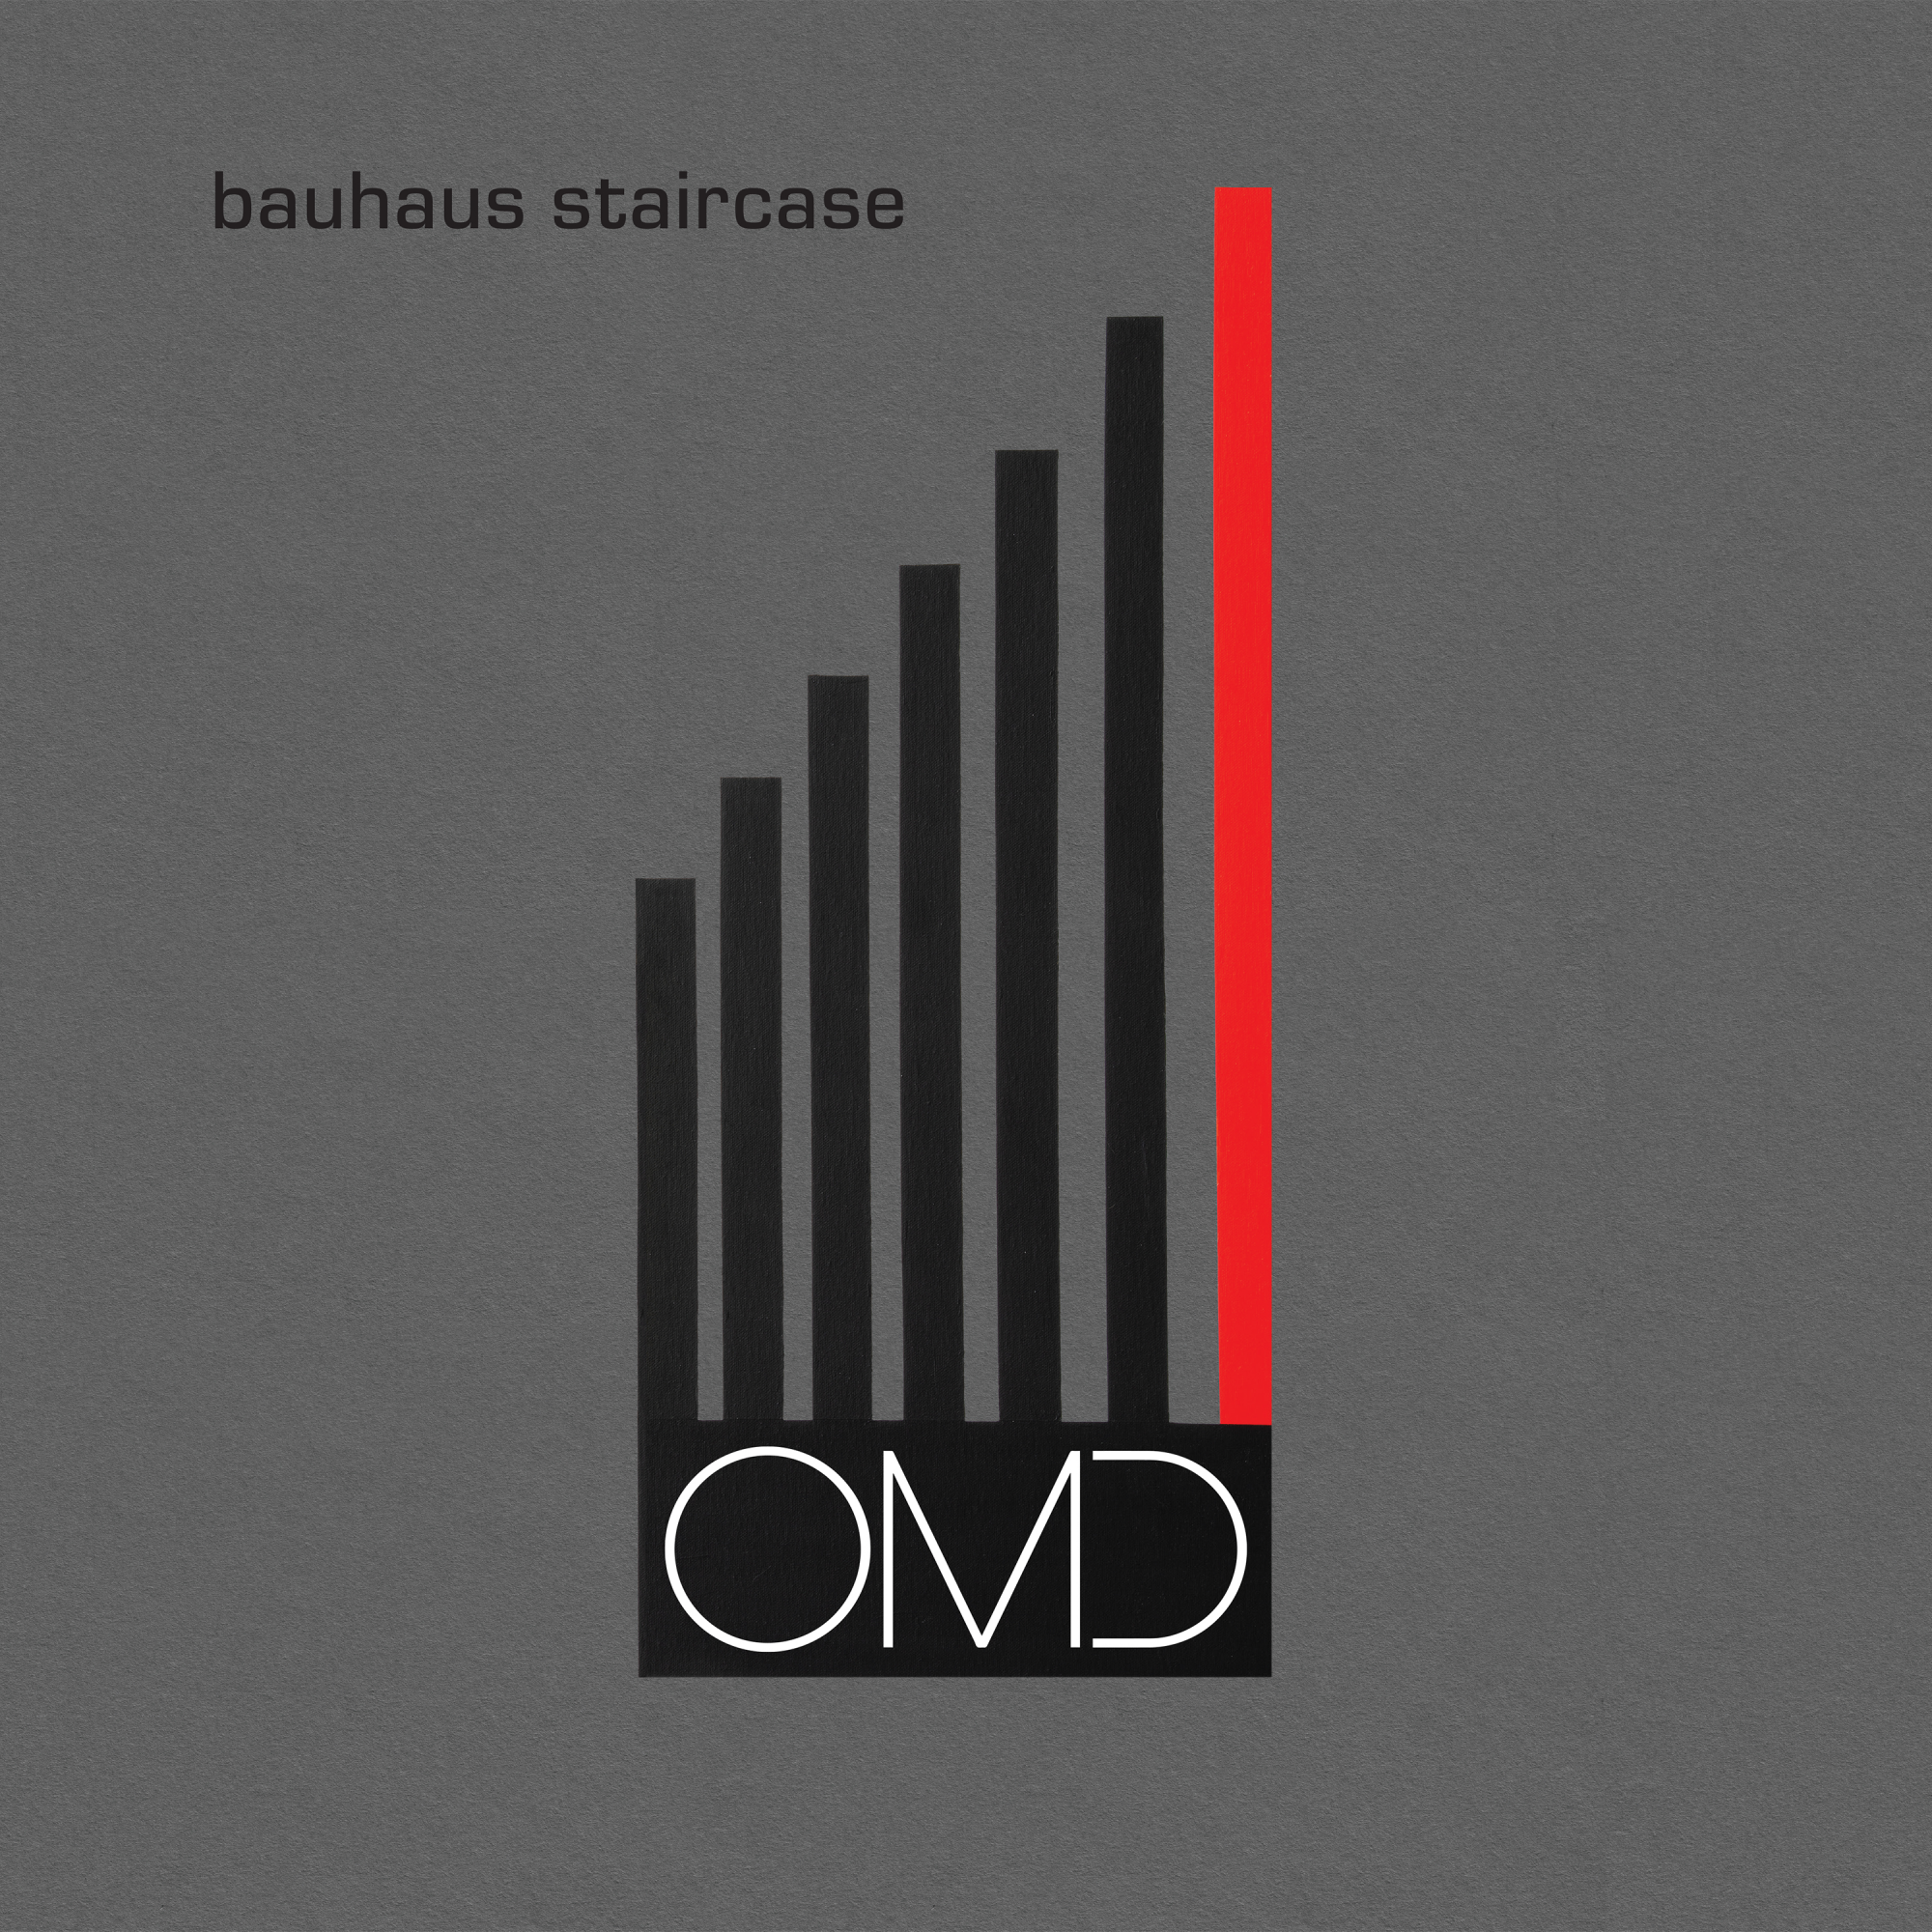 Bauhaus Staircase: Exclusive Silver Vinyl LP, Cassette + Limited Spot UV Print [Numbered]